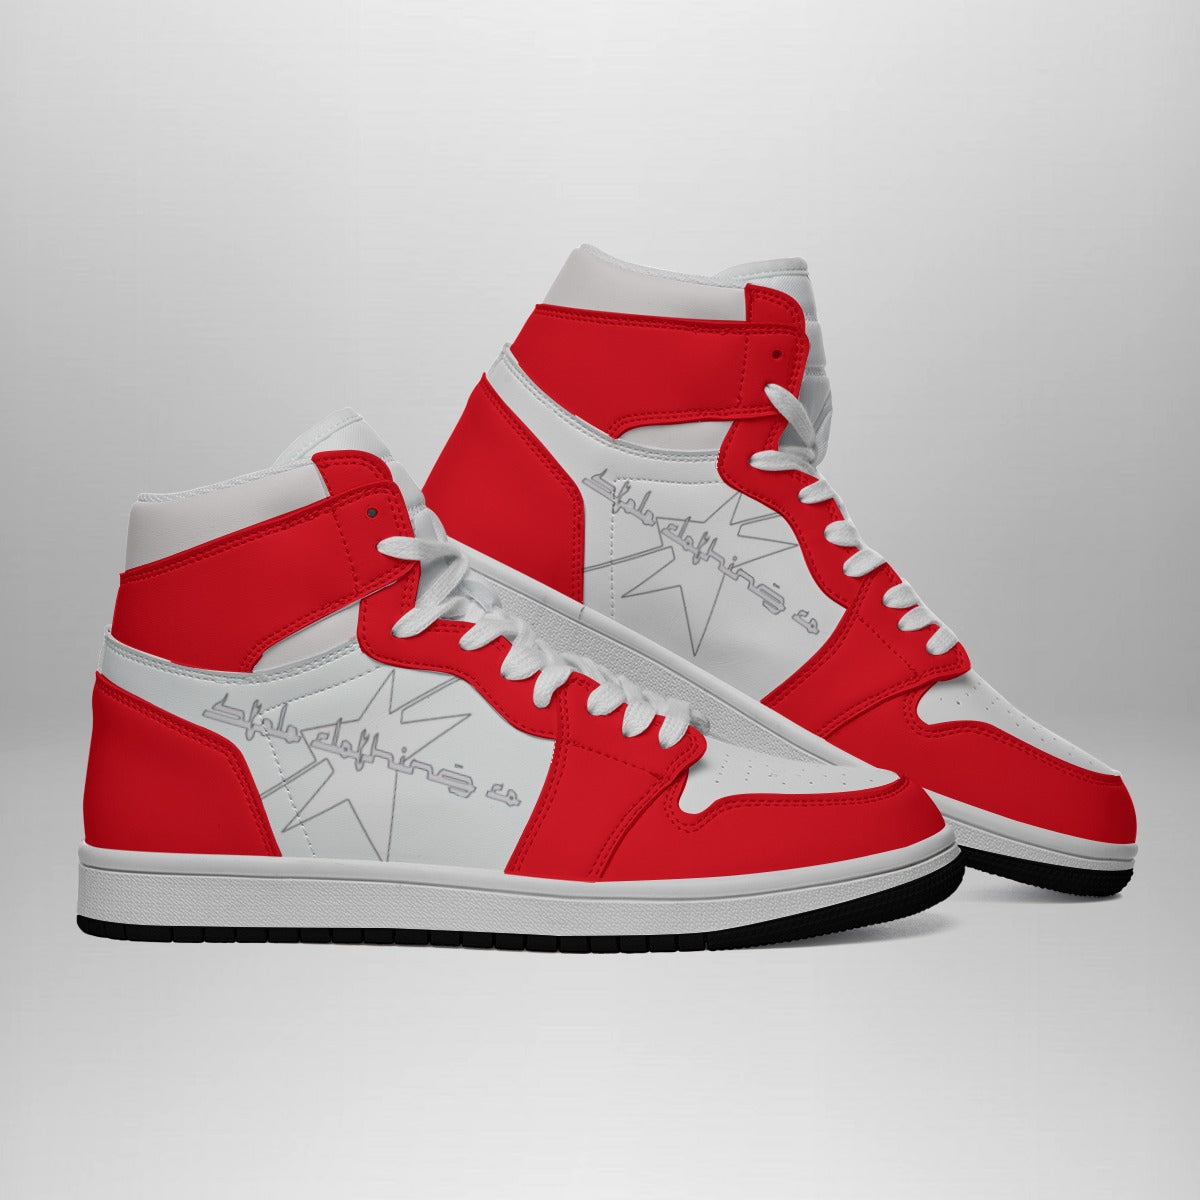 Stolo Clothing Co RED HEAD High Top Steppers